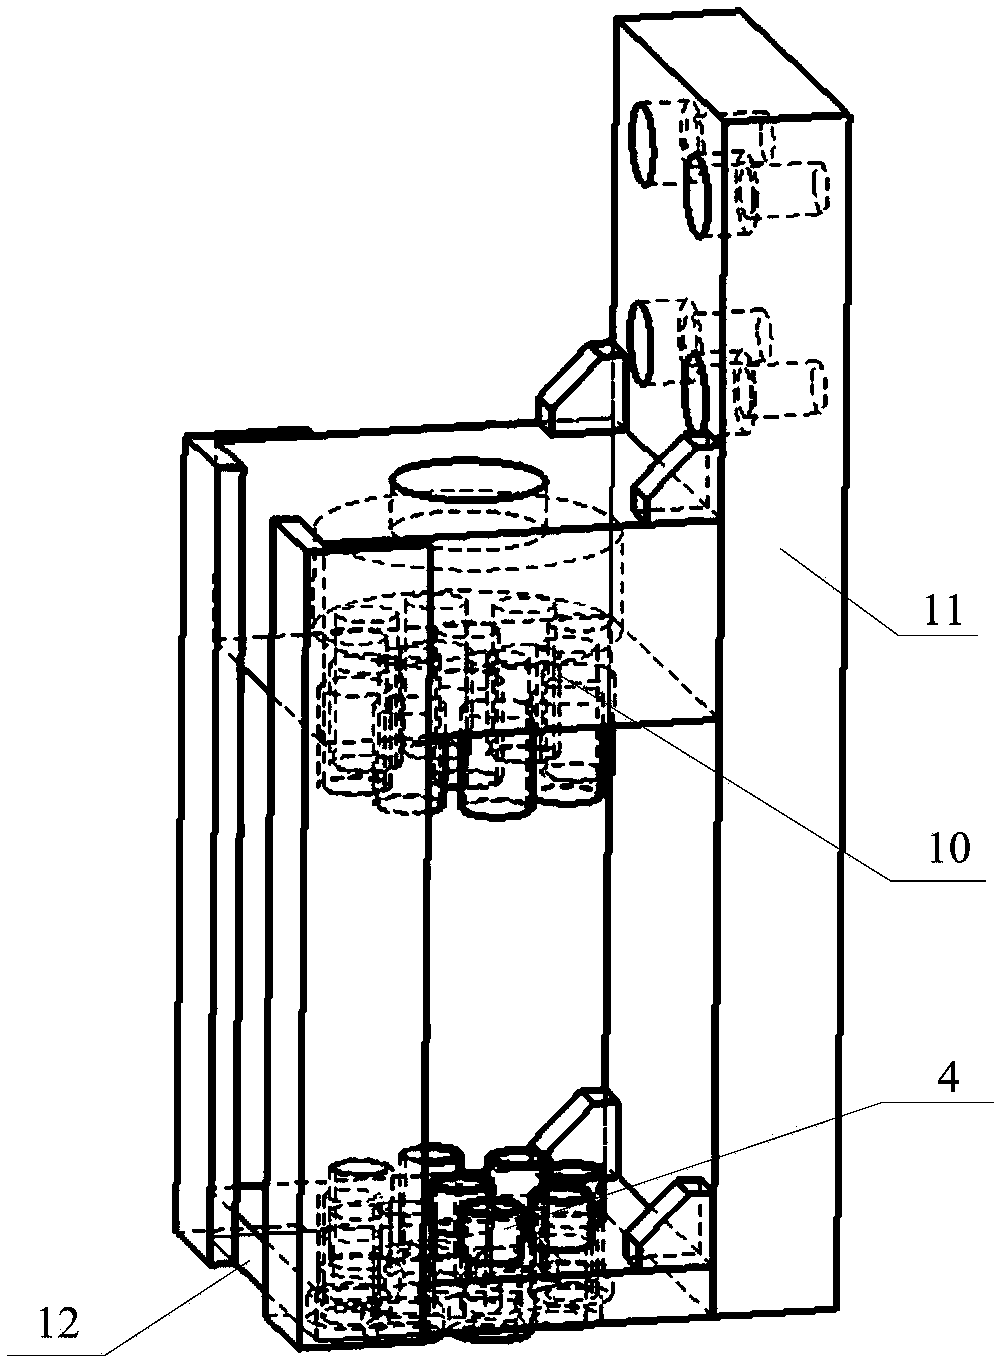 Multi-pipe floating complex curved surface self-finding track electrolytic processing device and method